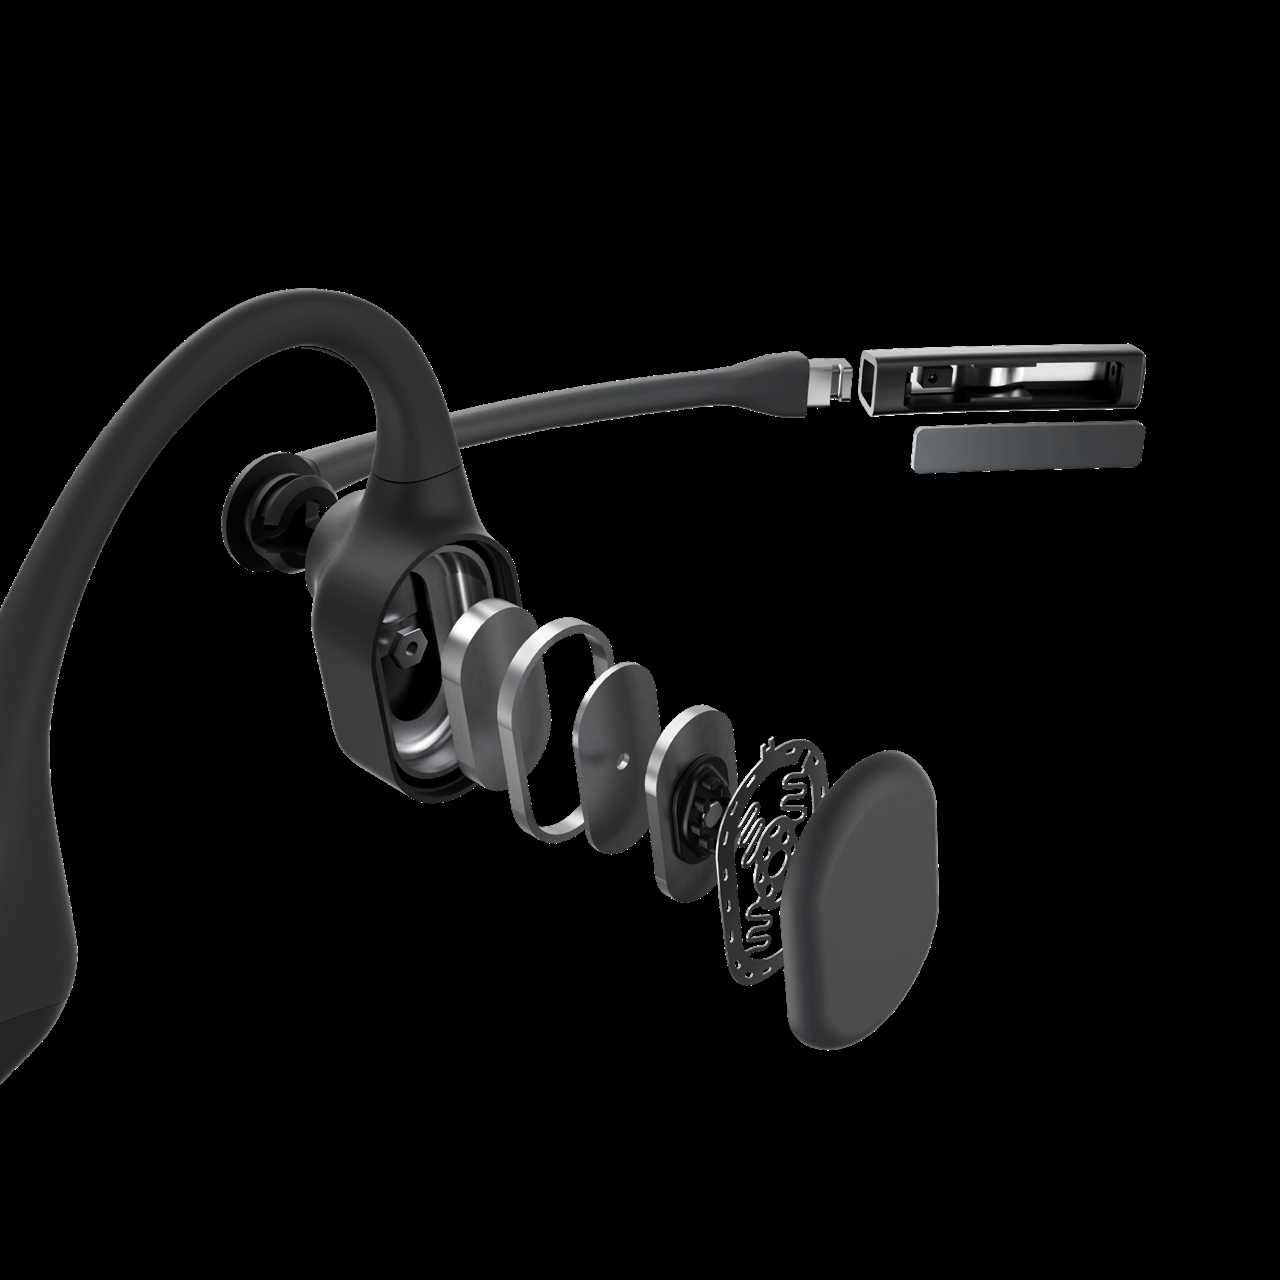 Discover the Best Bluetooth Earpiece for Clear and Convenient Communication